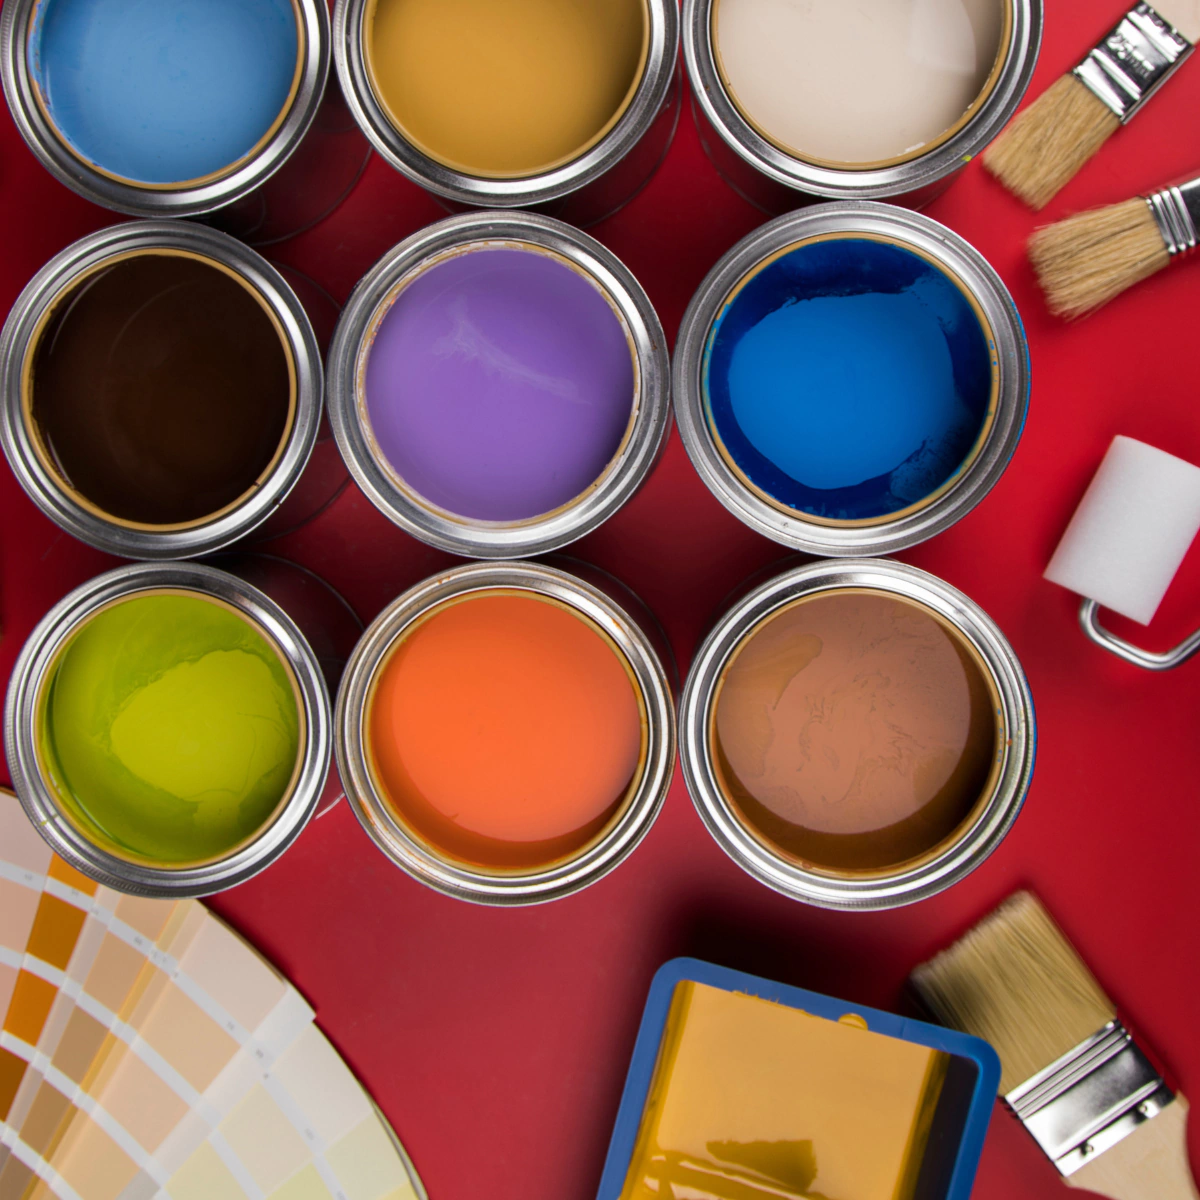 paint buckets and paint brushes laying a red surface